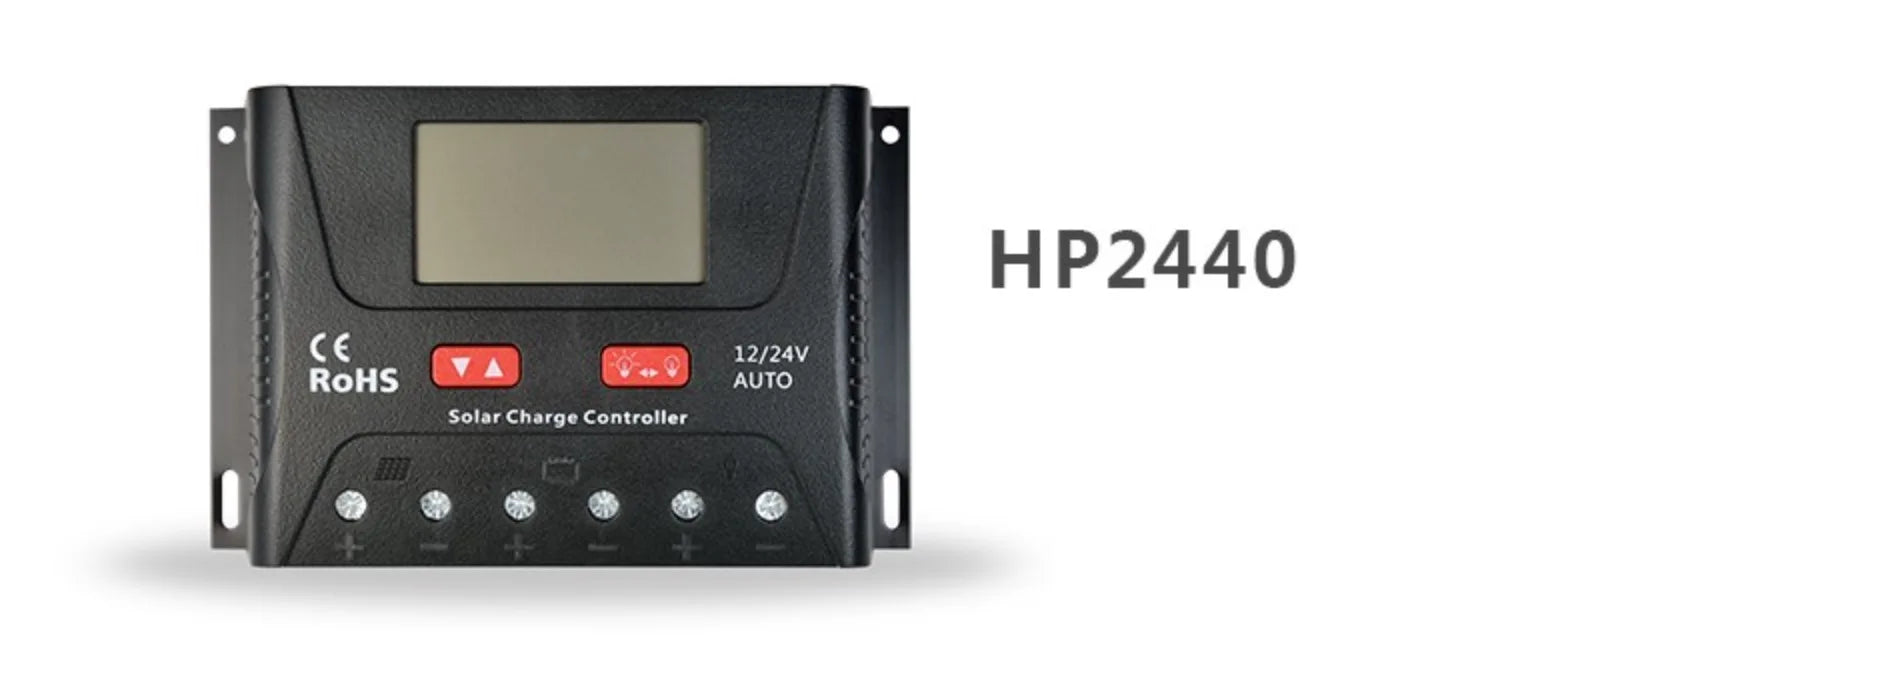 HP2440: 12V/24V Solar Charge Controller with ROHS compliance for auto systems.